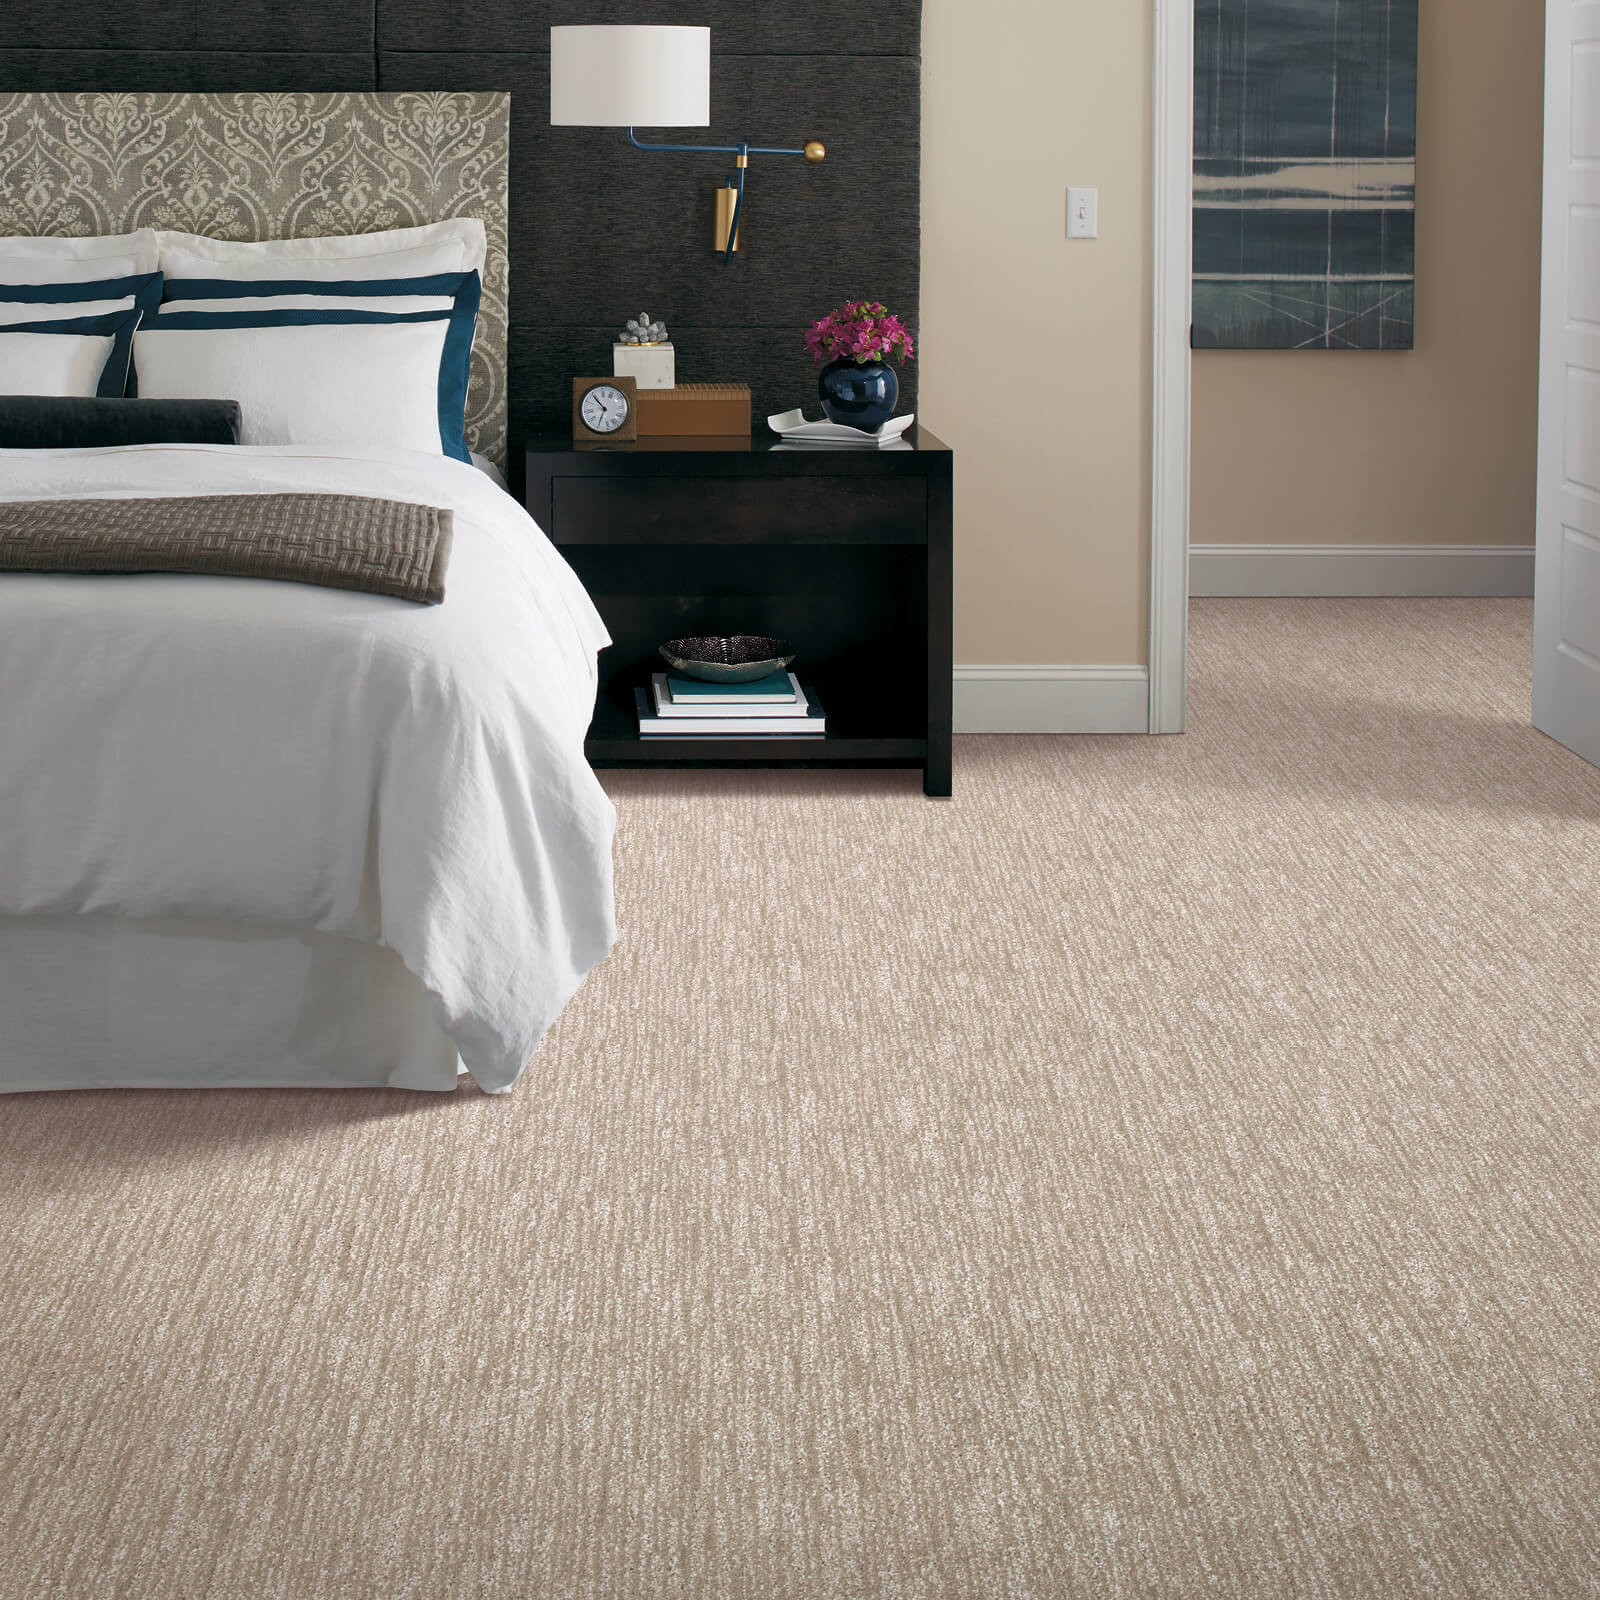 New carpet for bedroom | Sarmazian Brothers Flooring